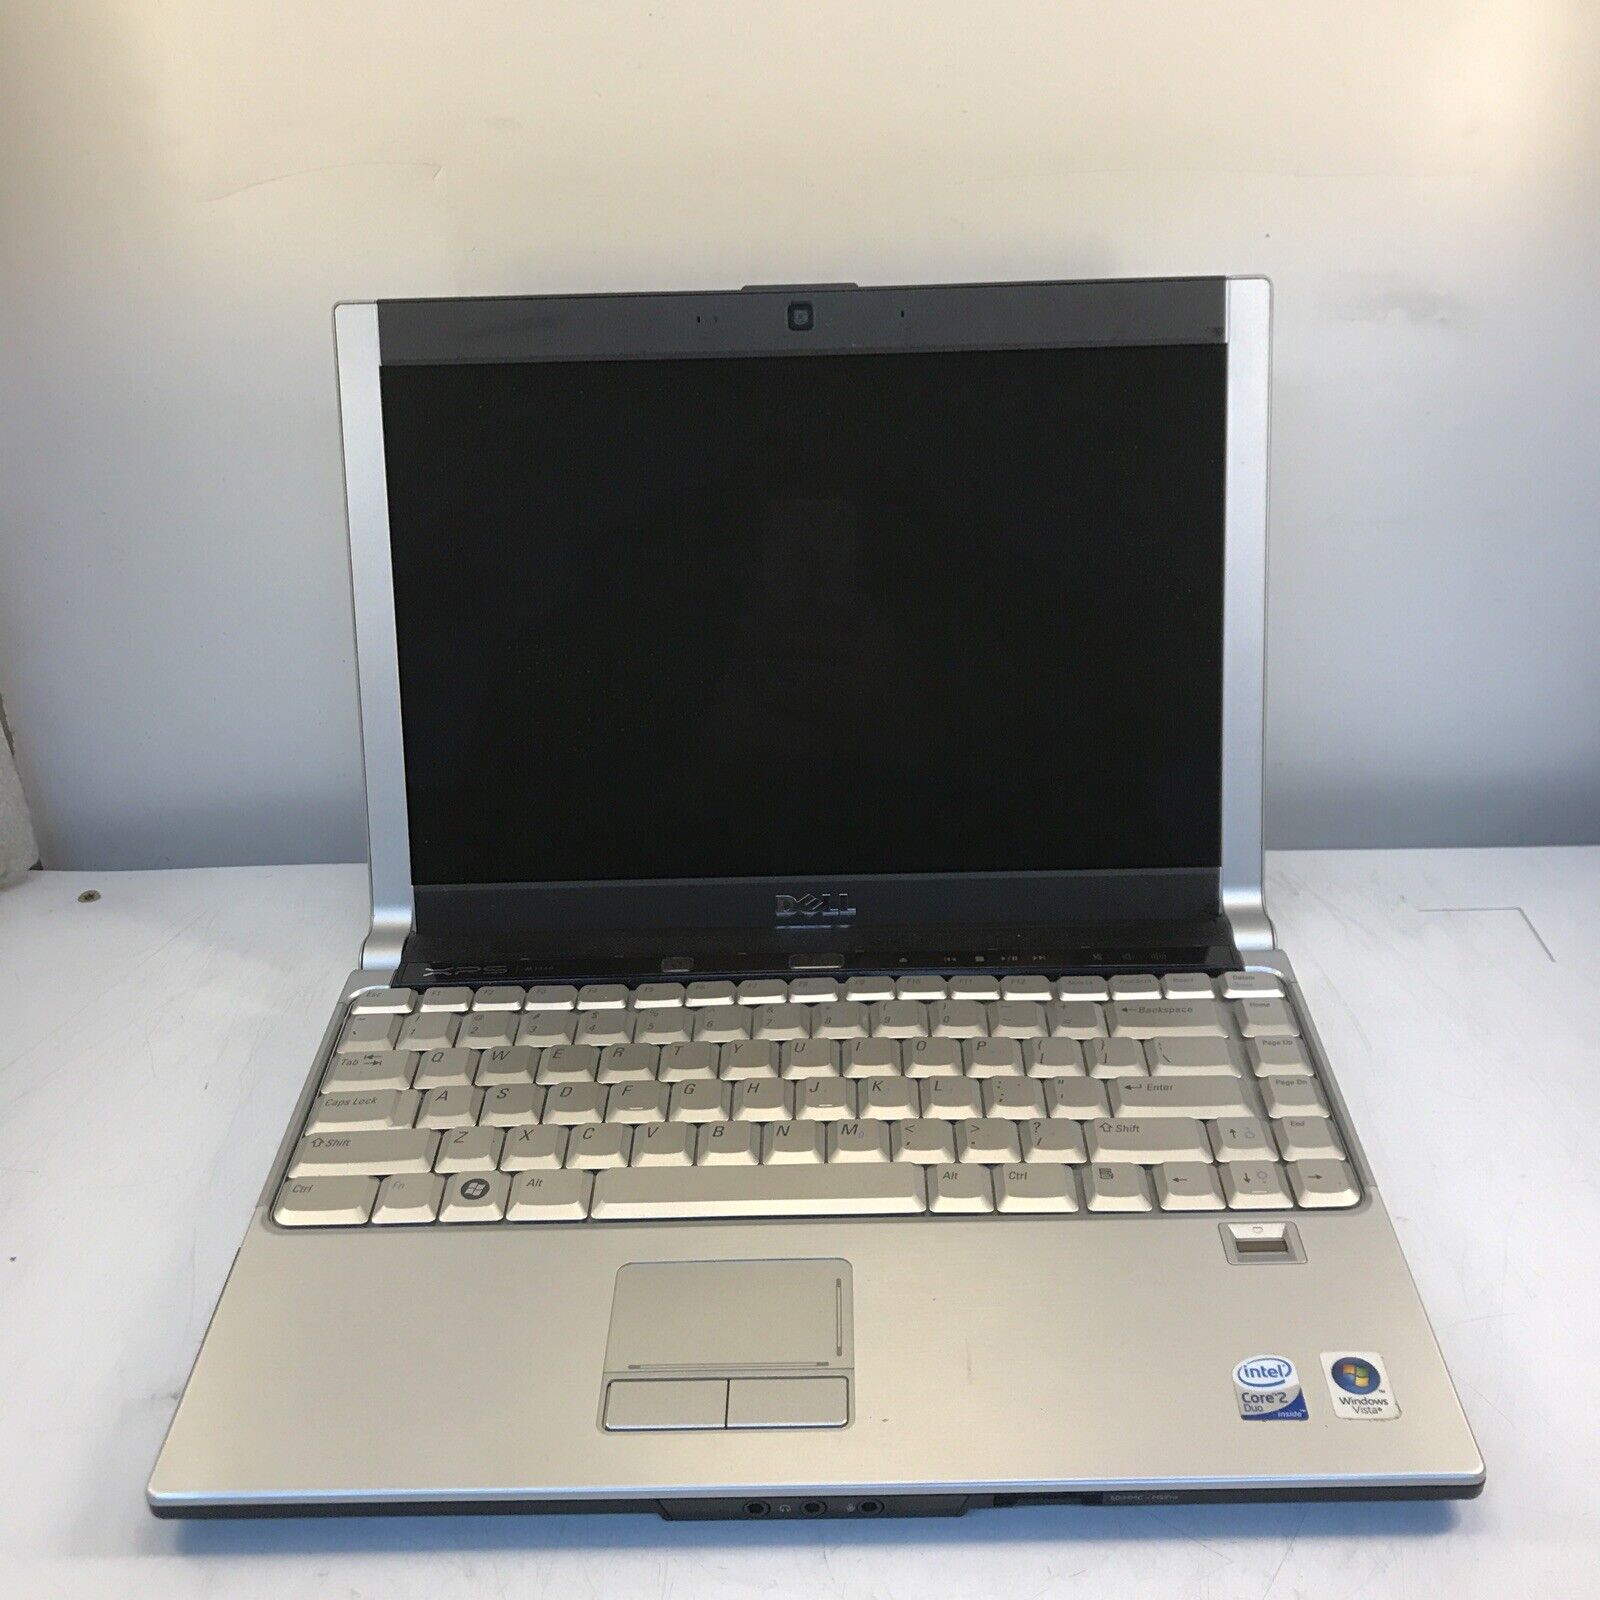 Dell XPS M1330 Core 2 Duo 2GHz 1GB No HDD boot to bios